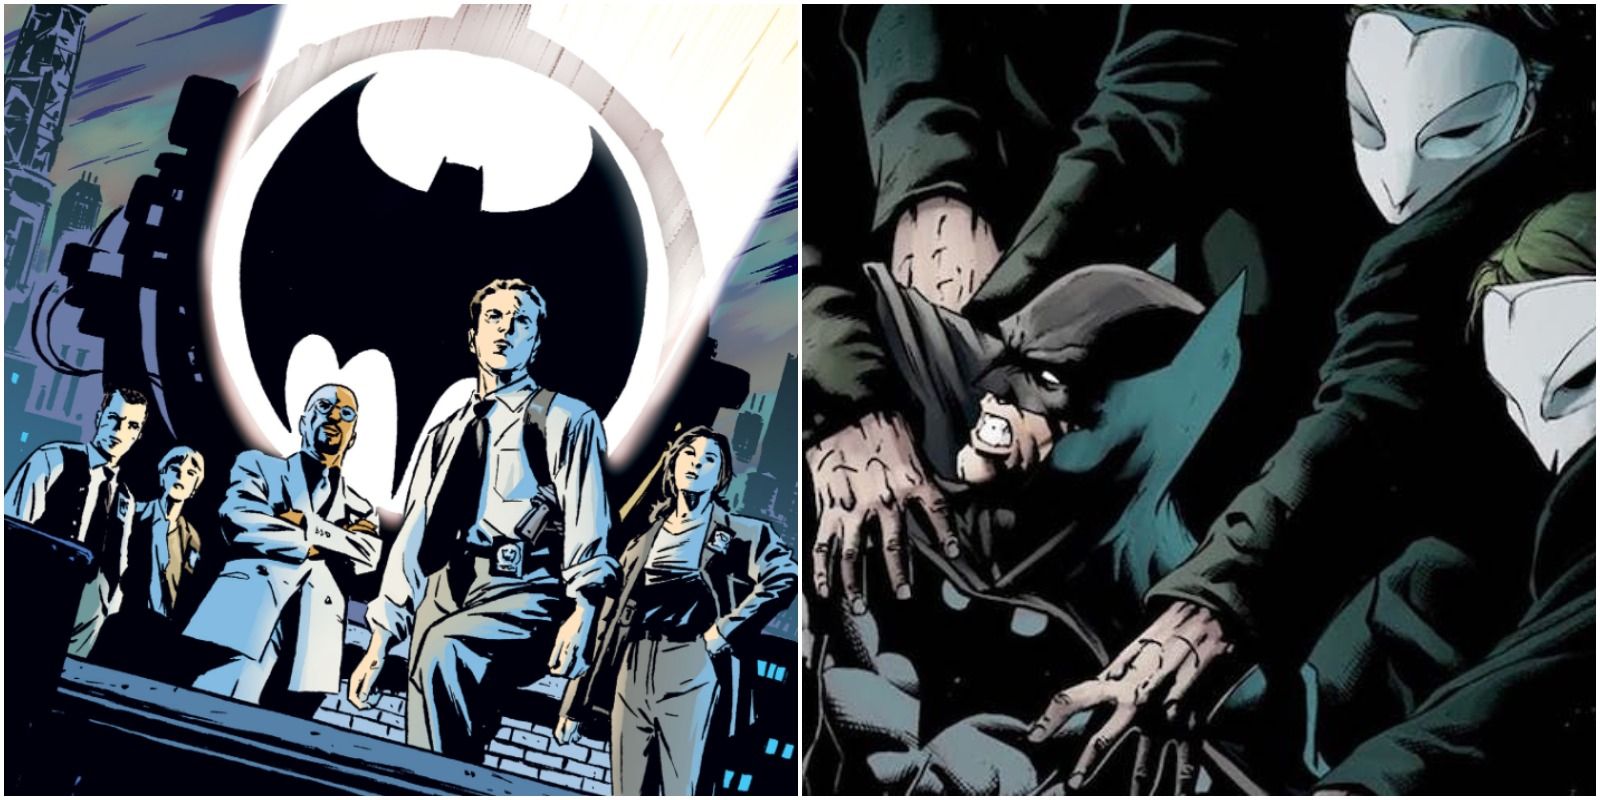 Cover art for DC's comic series Gotham Central and art for The Court of Owls arc during The New 52 Batman series